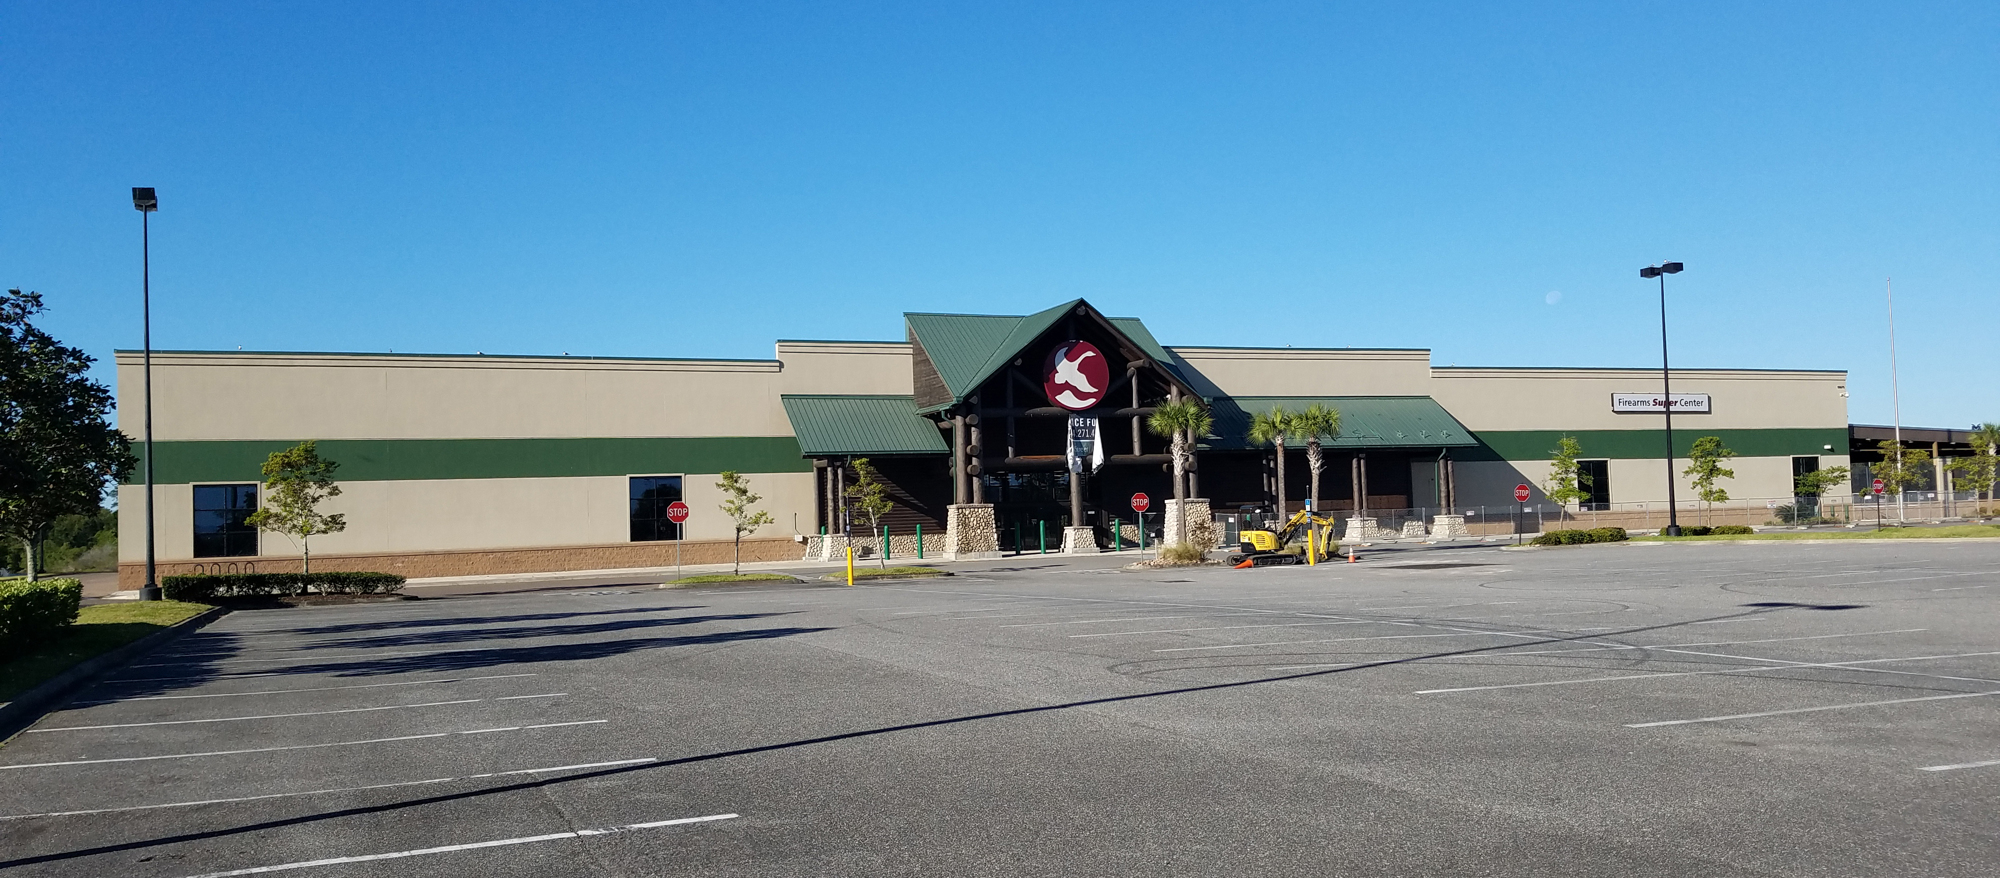 Gander Mountain occupied 81,537 square feet of space at River City Marketplace. The store closed in 2017.